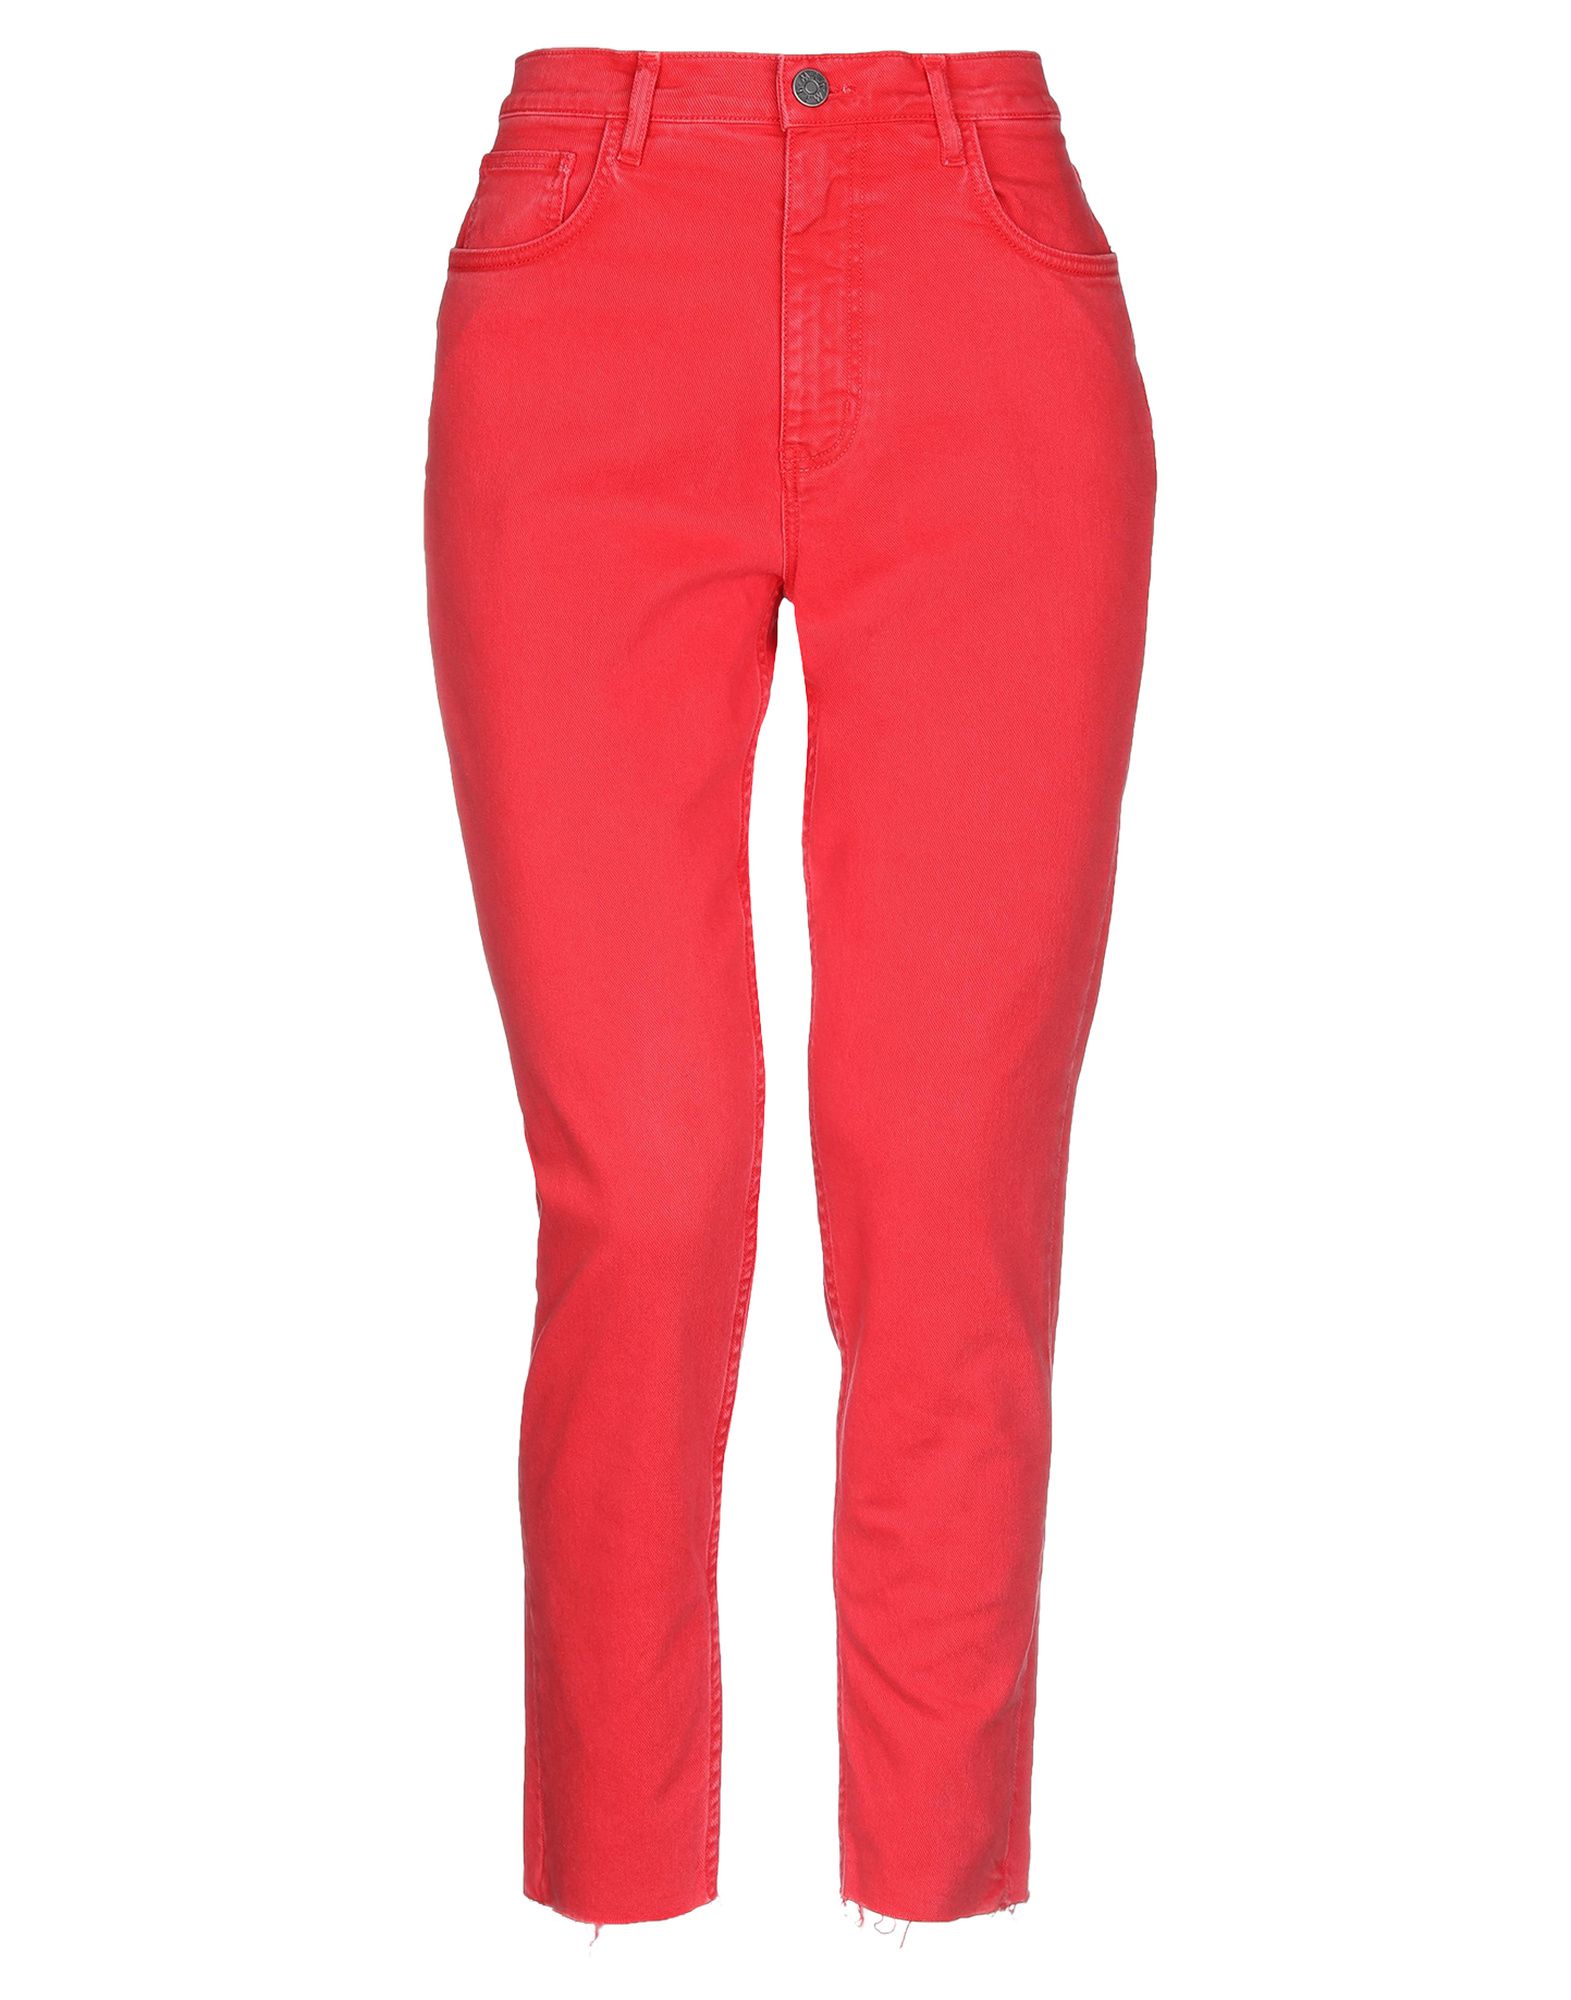 M.I.H. JEANS M. I.H JEANS WOMAN JEANS RED SIZE 26 COTTON, ELASTANE,42738670LH 2